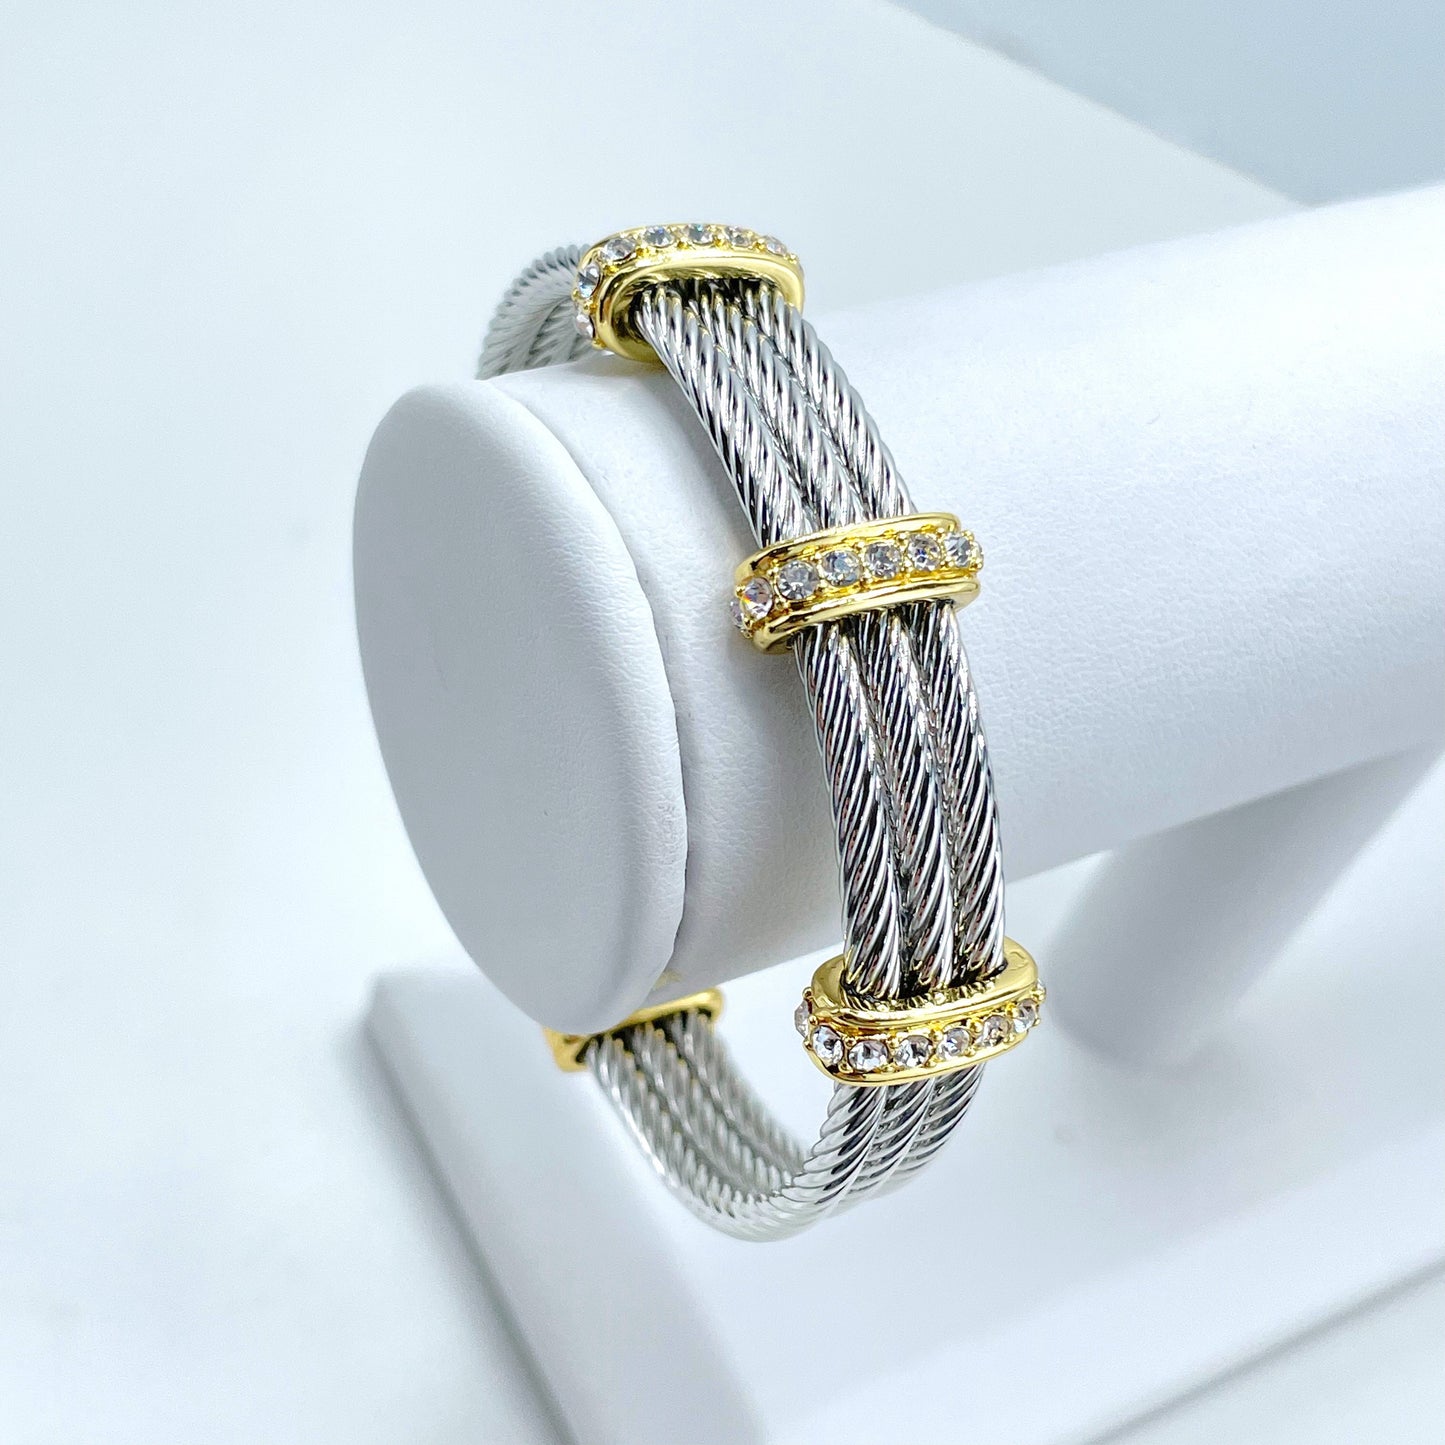 18k Gold Filled with Cubic Zirconia and White Gold Filled Texturized Twisted Waves Cuff Bracelet Wholesale Jewelry Making Supplies